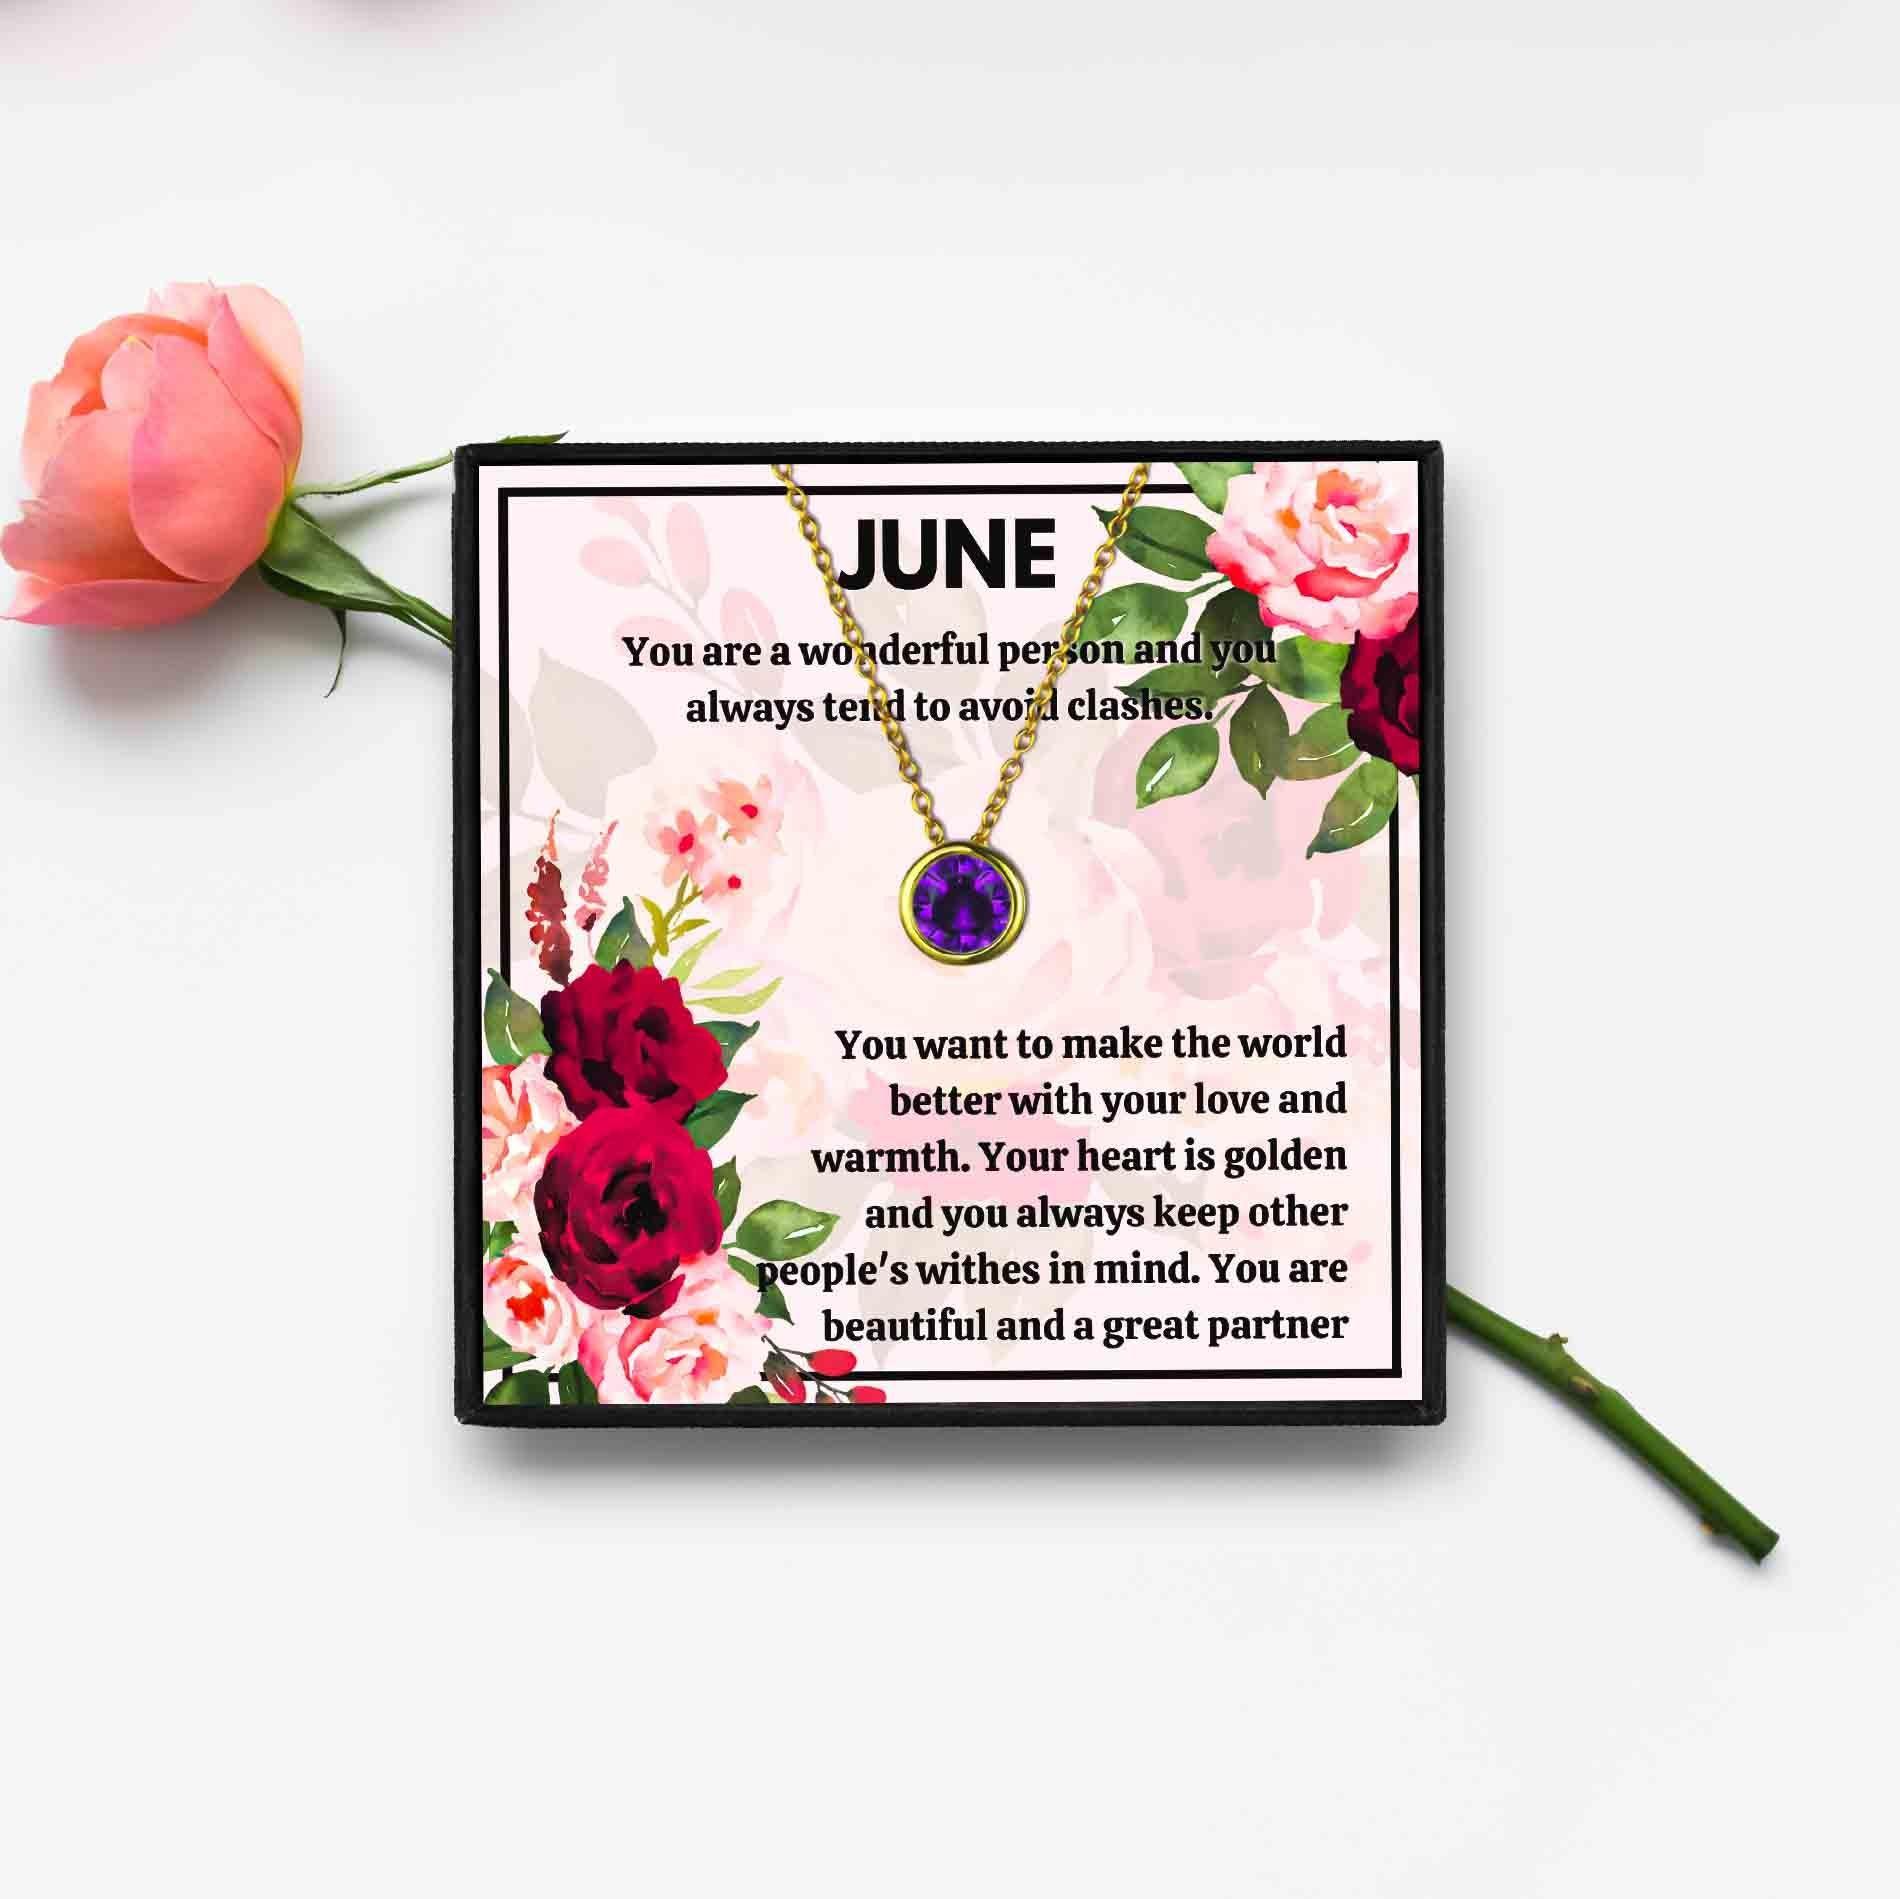 Meaningful June Birthstone Necklace Gift Set in 2023 | Meaningful June Birthstone Necklace Gift Set - undefined | june birthstone gifts, june birthstone jewelry, june birthstone meaning, june birthstone necklace, june gemstone | From Hunny Life | hunnylife.com